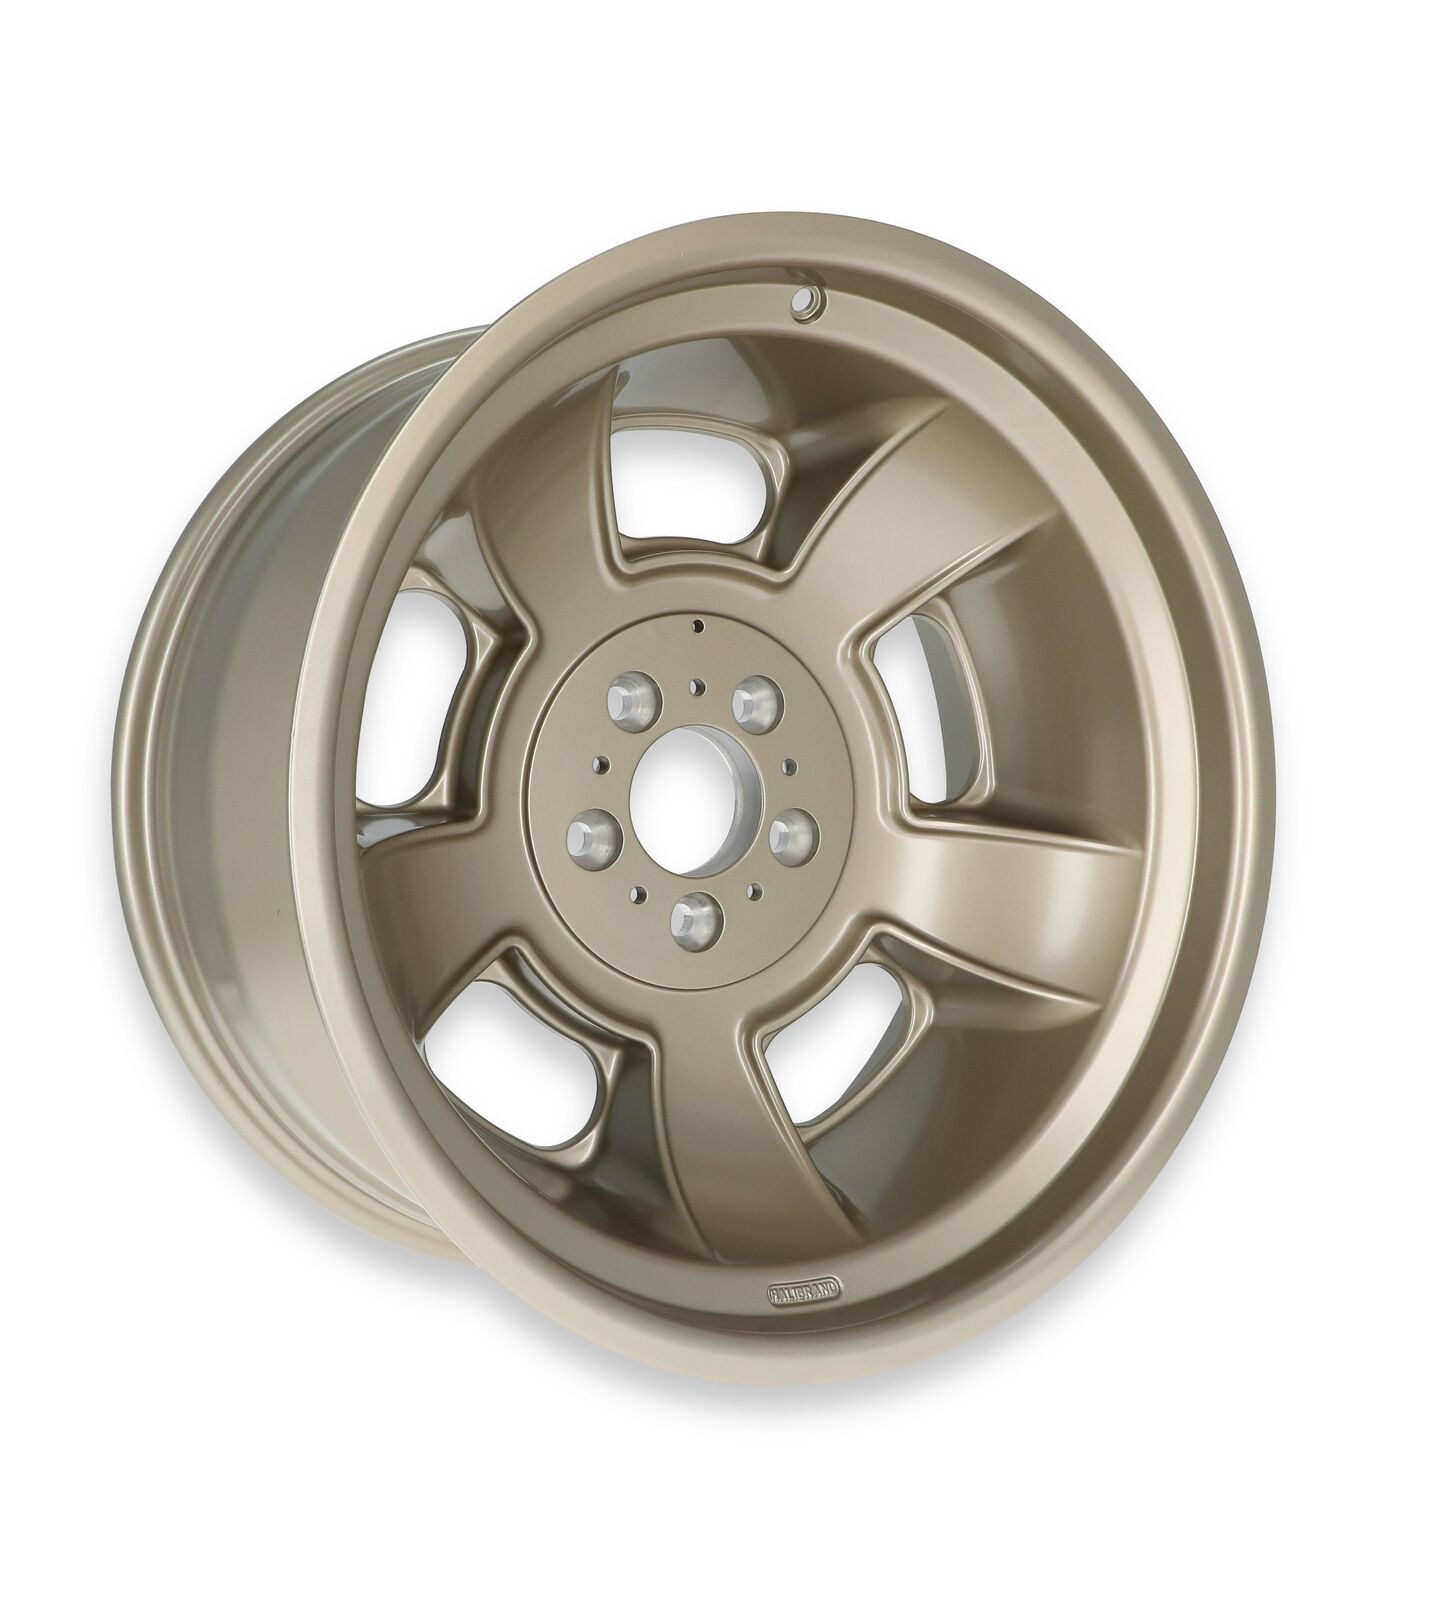 Halibrand HB007-009 Sprint Wheel with Spinner 20x10 - 4.0 bs MAG7 Semi Gloss